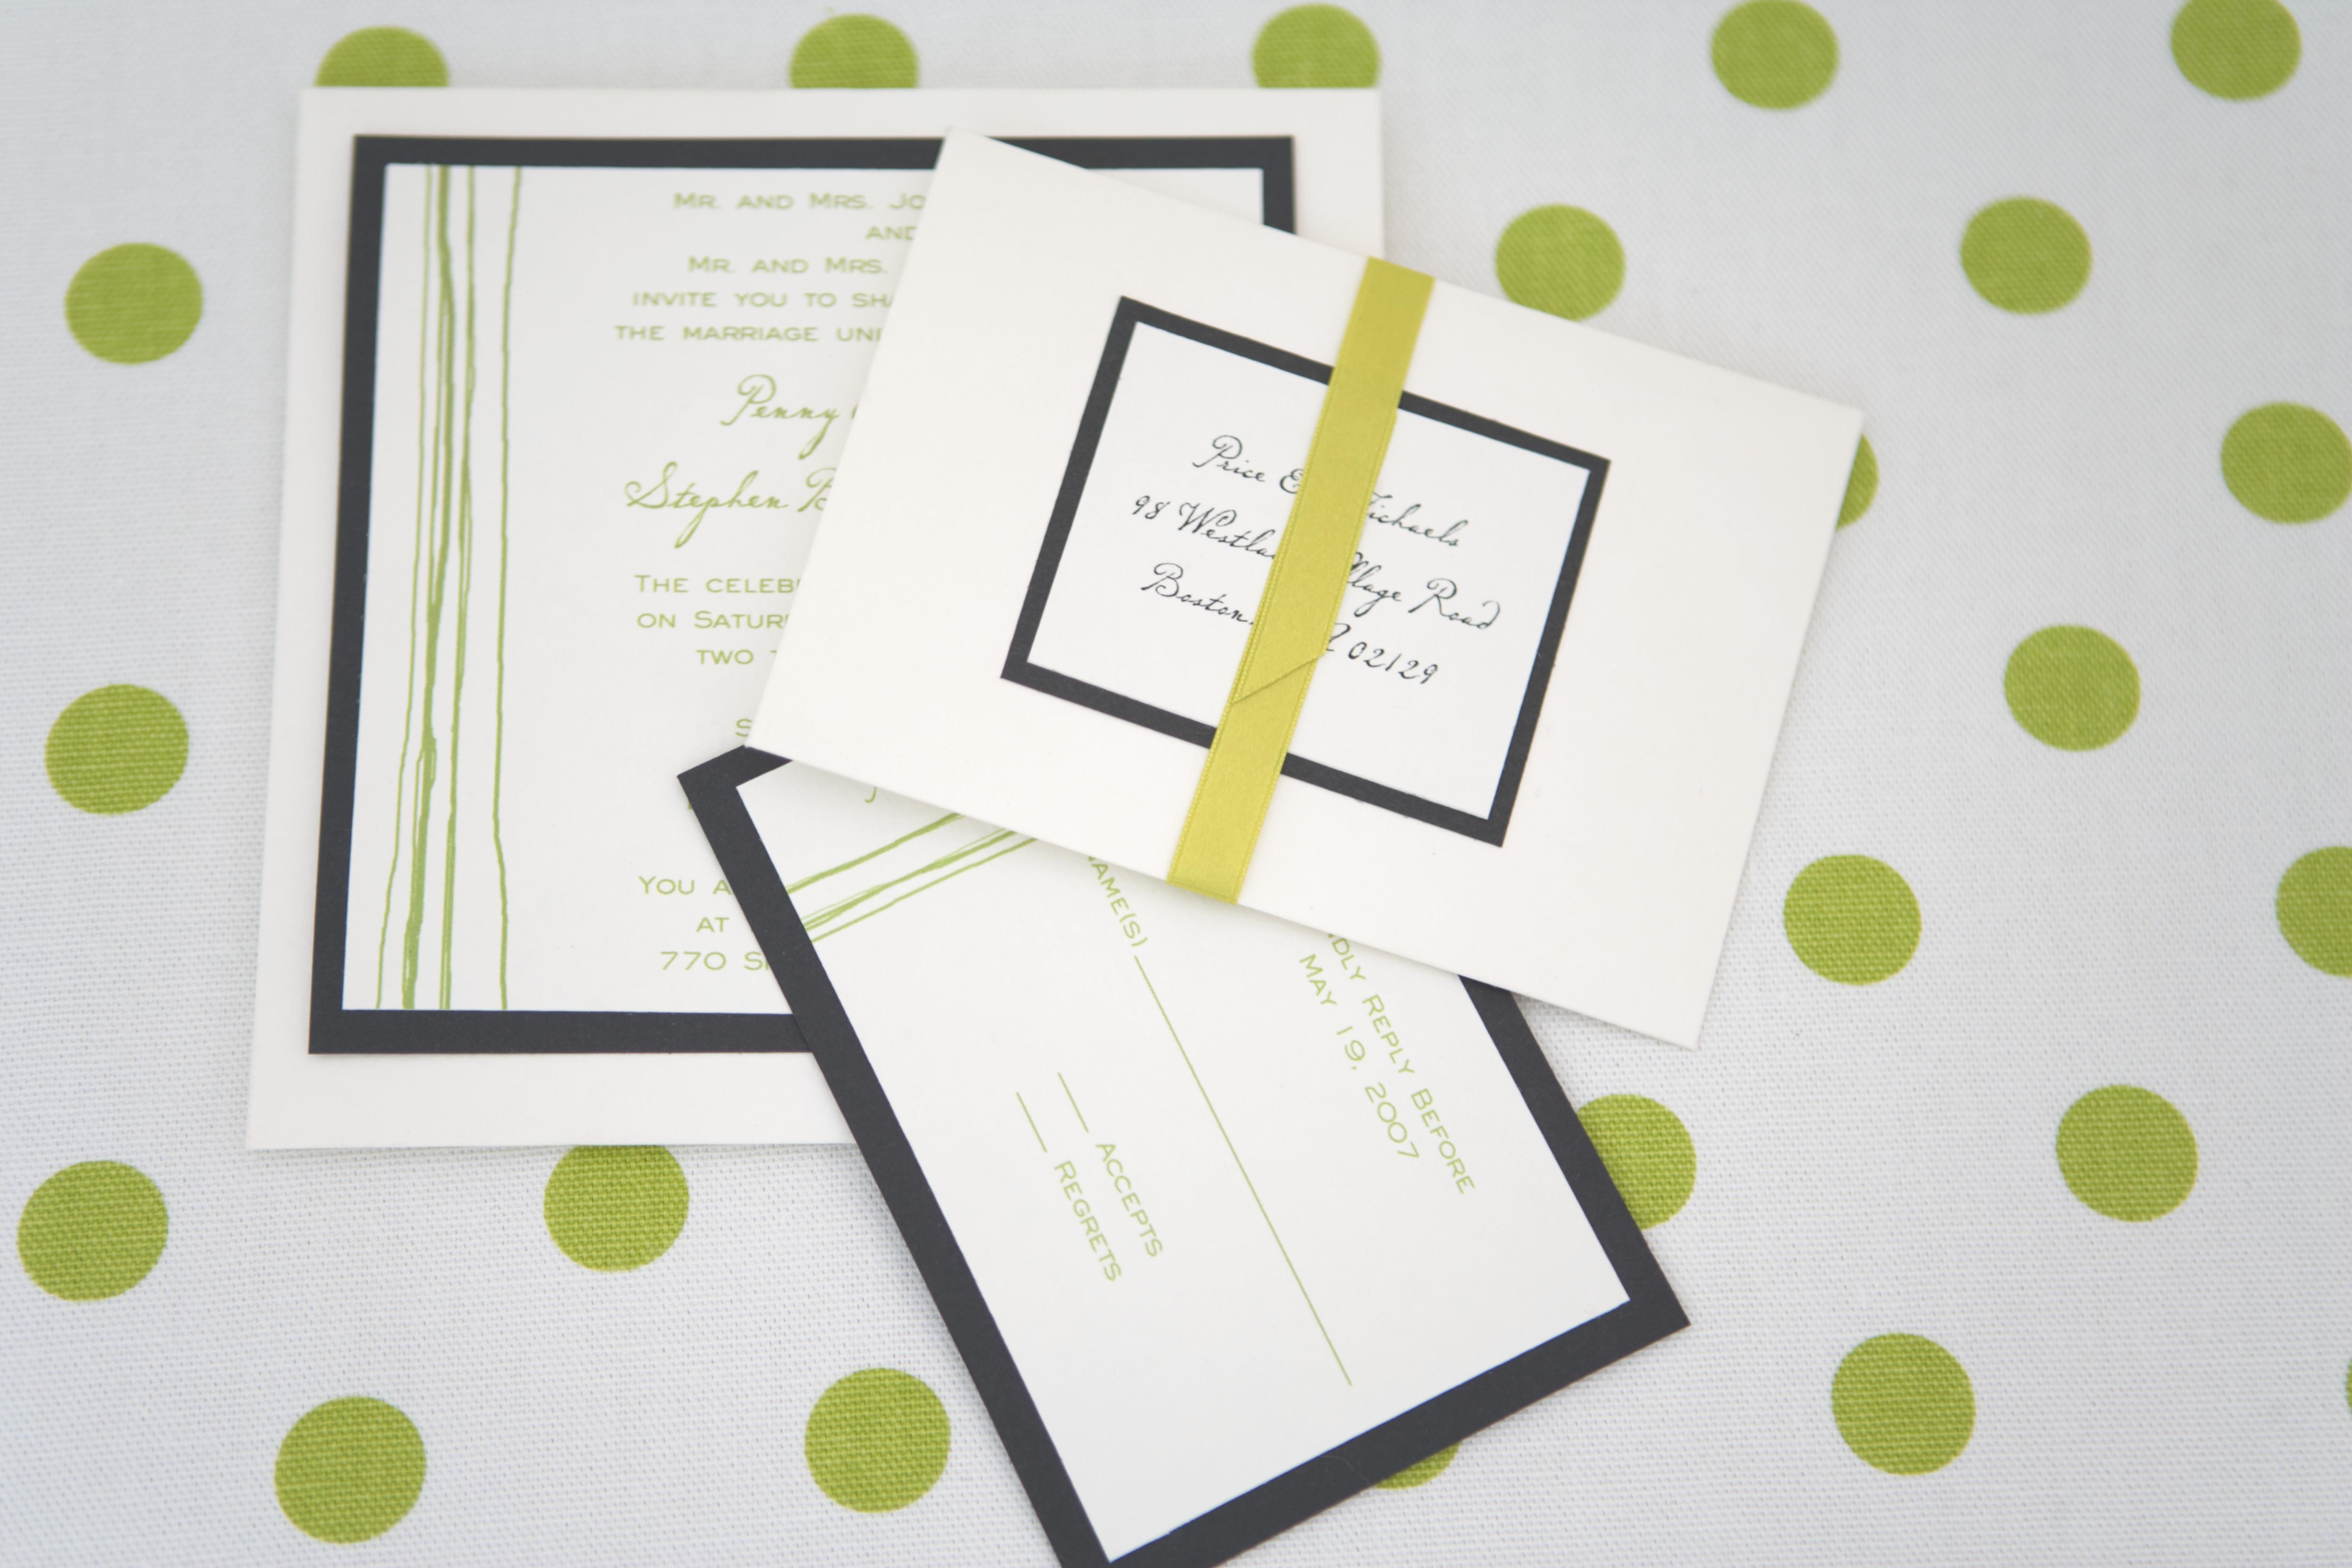 Invitation Wording Ideas for Special Events